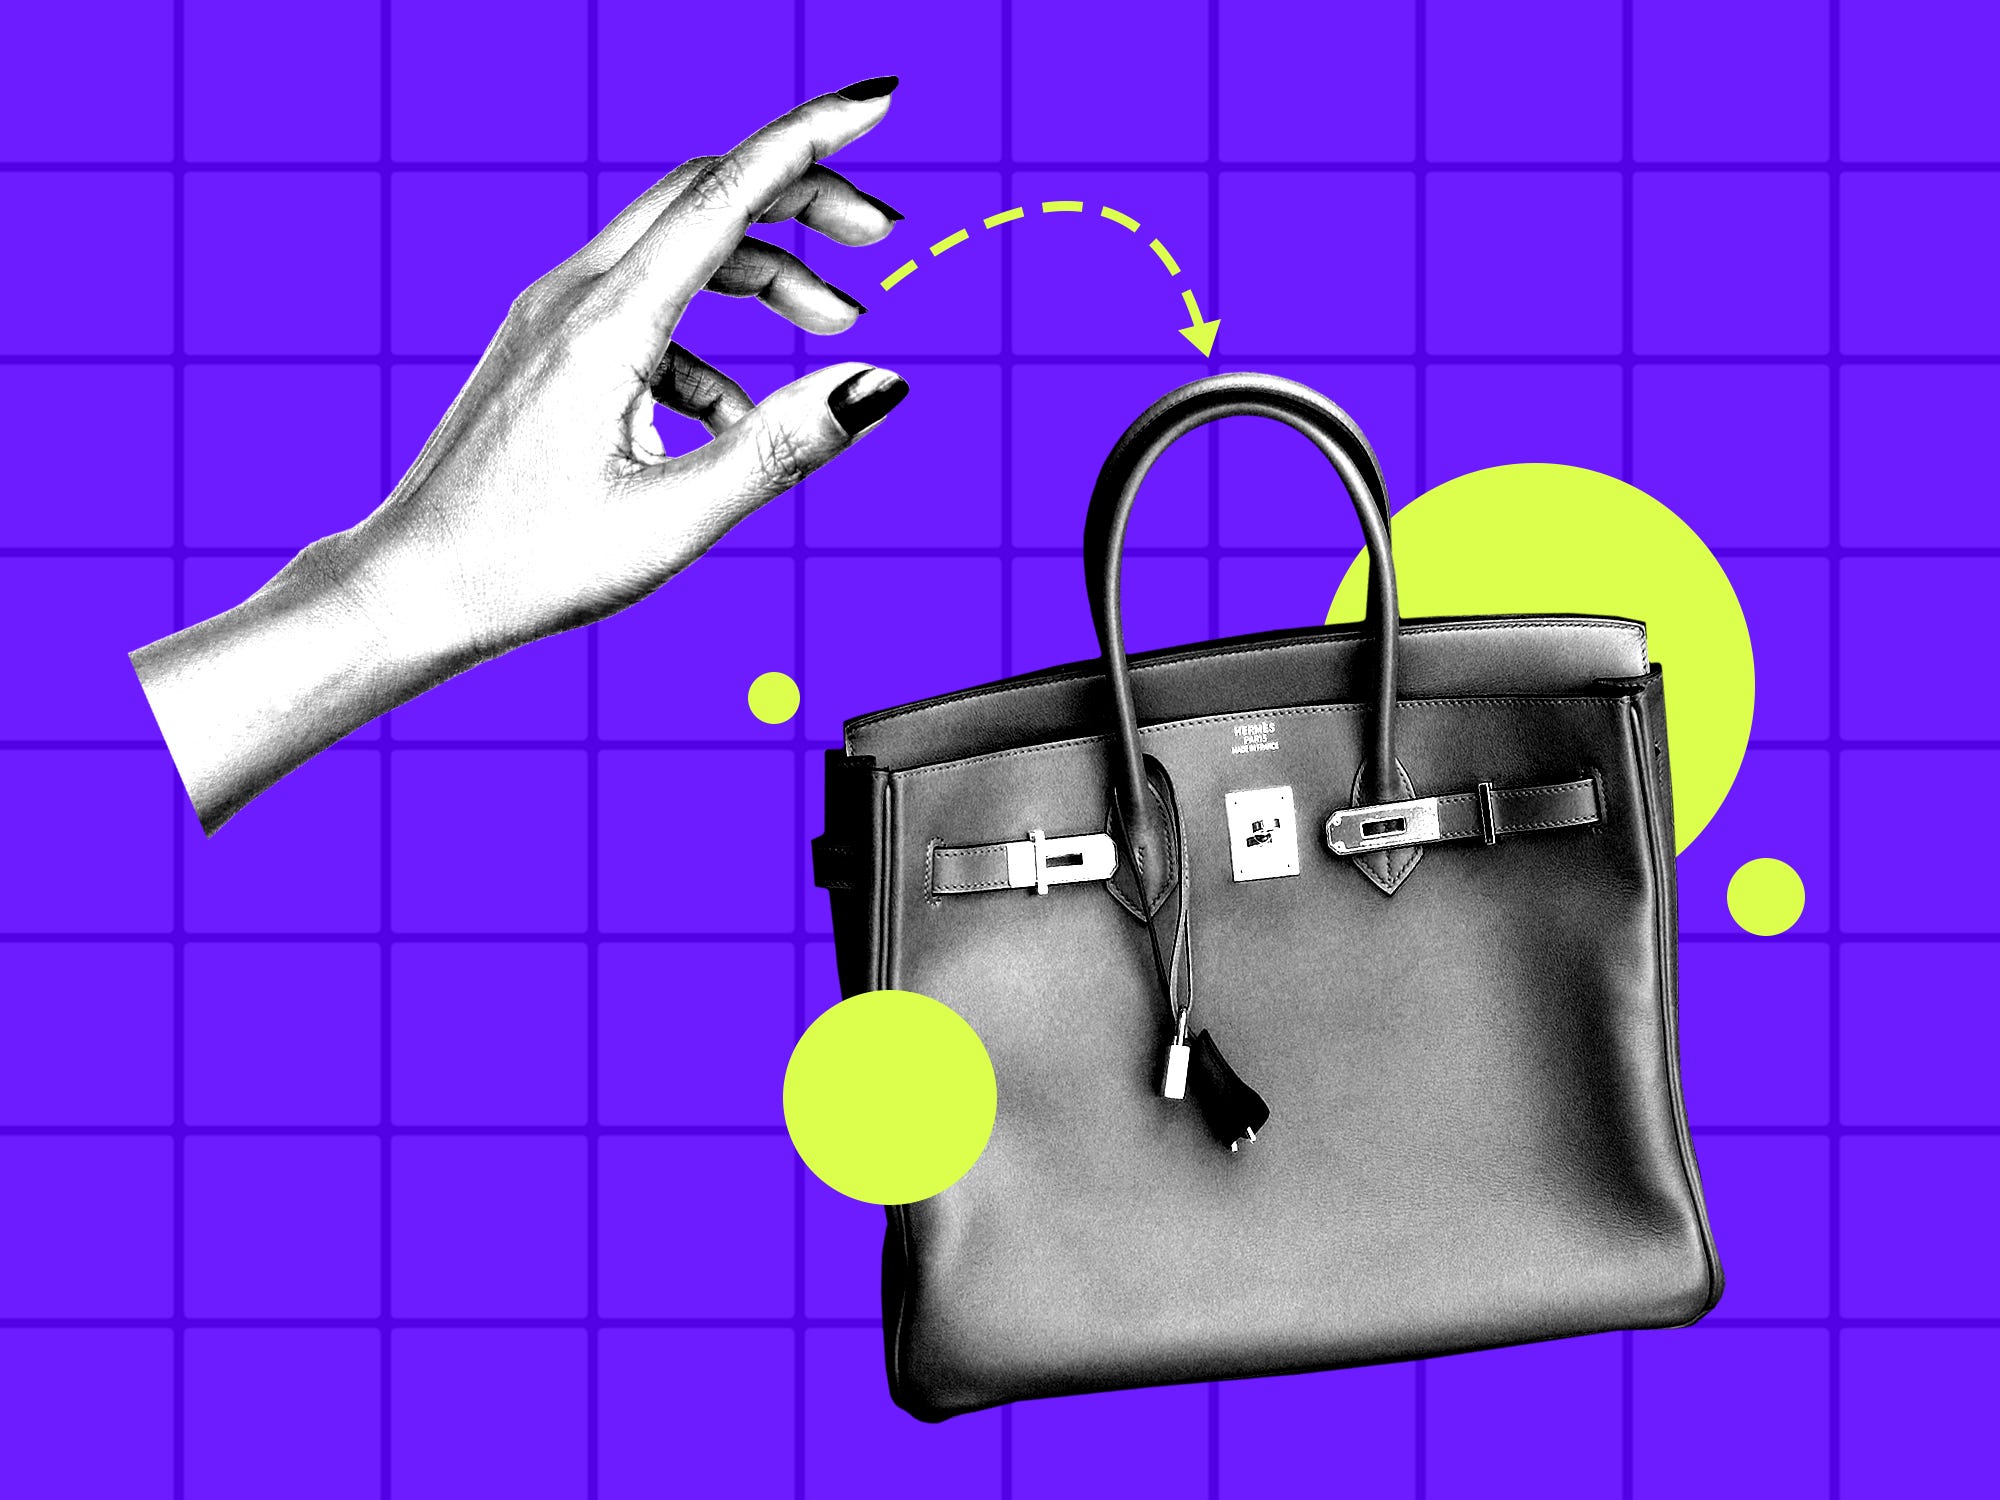 <ul class="summary-list"> <li>The <a href="https://www.businessinsider.com/how-the-iconic-hermes-birkin-handbag-was-invented-2023-7">Hermès Birkin bag</a> is a pop culture icon and status symbol.</li> <li>However, it's not that simple to buy, even if you have the funds.</li> <li>Business Insider spoke with Birkin influencers about how they secured their bags.</li> </ul><p>For those even vaguely familiar with designer items, the Hermès Birkin bag is a recognizable <a href="https://www.businessinsider.com/hermes-became-ultimate-status-symbol-2024-2" rel="noopener">symbol of luxury</a>.</p><p>The structured, trapezoidal handbag has been made famous by <a href="https://www.businessinsider.com/kim-kardashian-bikini-selfie-closet-2018-12" rel="noopener">The Kardashians</a>, clueless "Sex and the City" character Samantha Jones ("It's not a bag. It's a Birkin."), and myriad hip-hop lyrics — as the City Girls once famously proclaimed, "Big Birkin bag hold five, six figures."</p><p>But purchasing a new one isn't as simple as walking into your local boutique and selecting one from a cabinet. Waiting lists to buy the bag no longer exist, and stock is both limited and in high demand.</p><p>Business Insider spoke with Charles Gross and Cristina Anghel, Birkin influencers and Hermès experts, for tips on their strategies to secure the elusive bags, considered one of the <a href="https://www.businessinsider.com/jane-birkin-bag-status-symbol-best-luxury-investments-2023-7" rel="noopener">best luxury investments</a> on the market.</p><p>Hermès did not respond to a request for comment from Business Insider.</p><div class="read-original">Read the original article on <a href="https://www.businessinsider.com/guides/style/how-to-buy-a-birkin-bag">Business Insider</a></div>